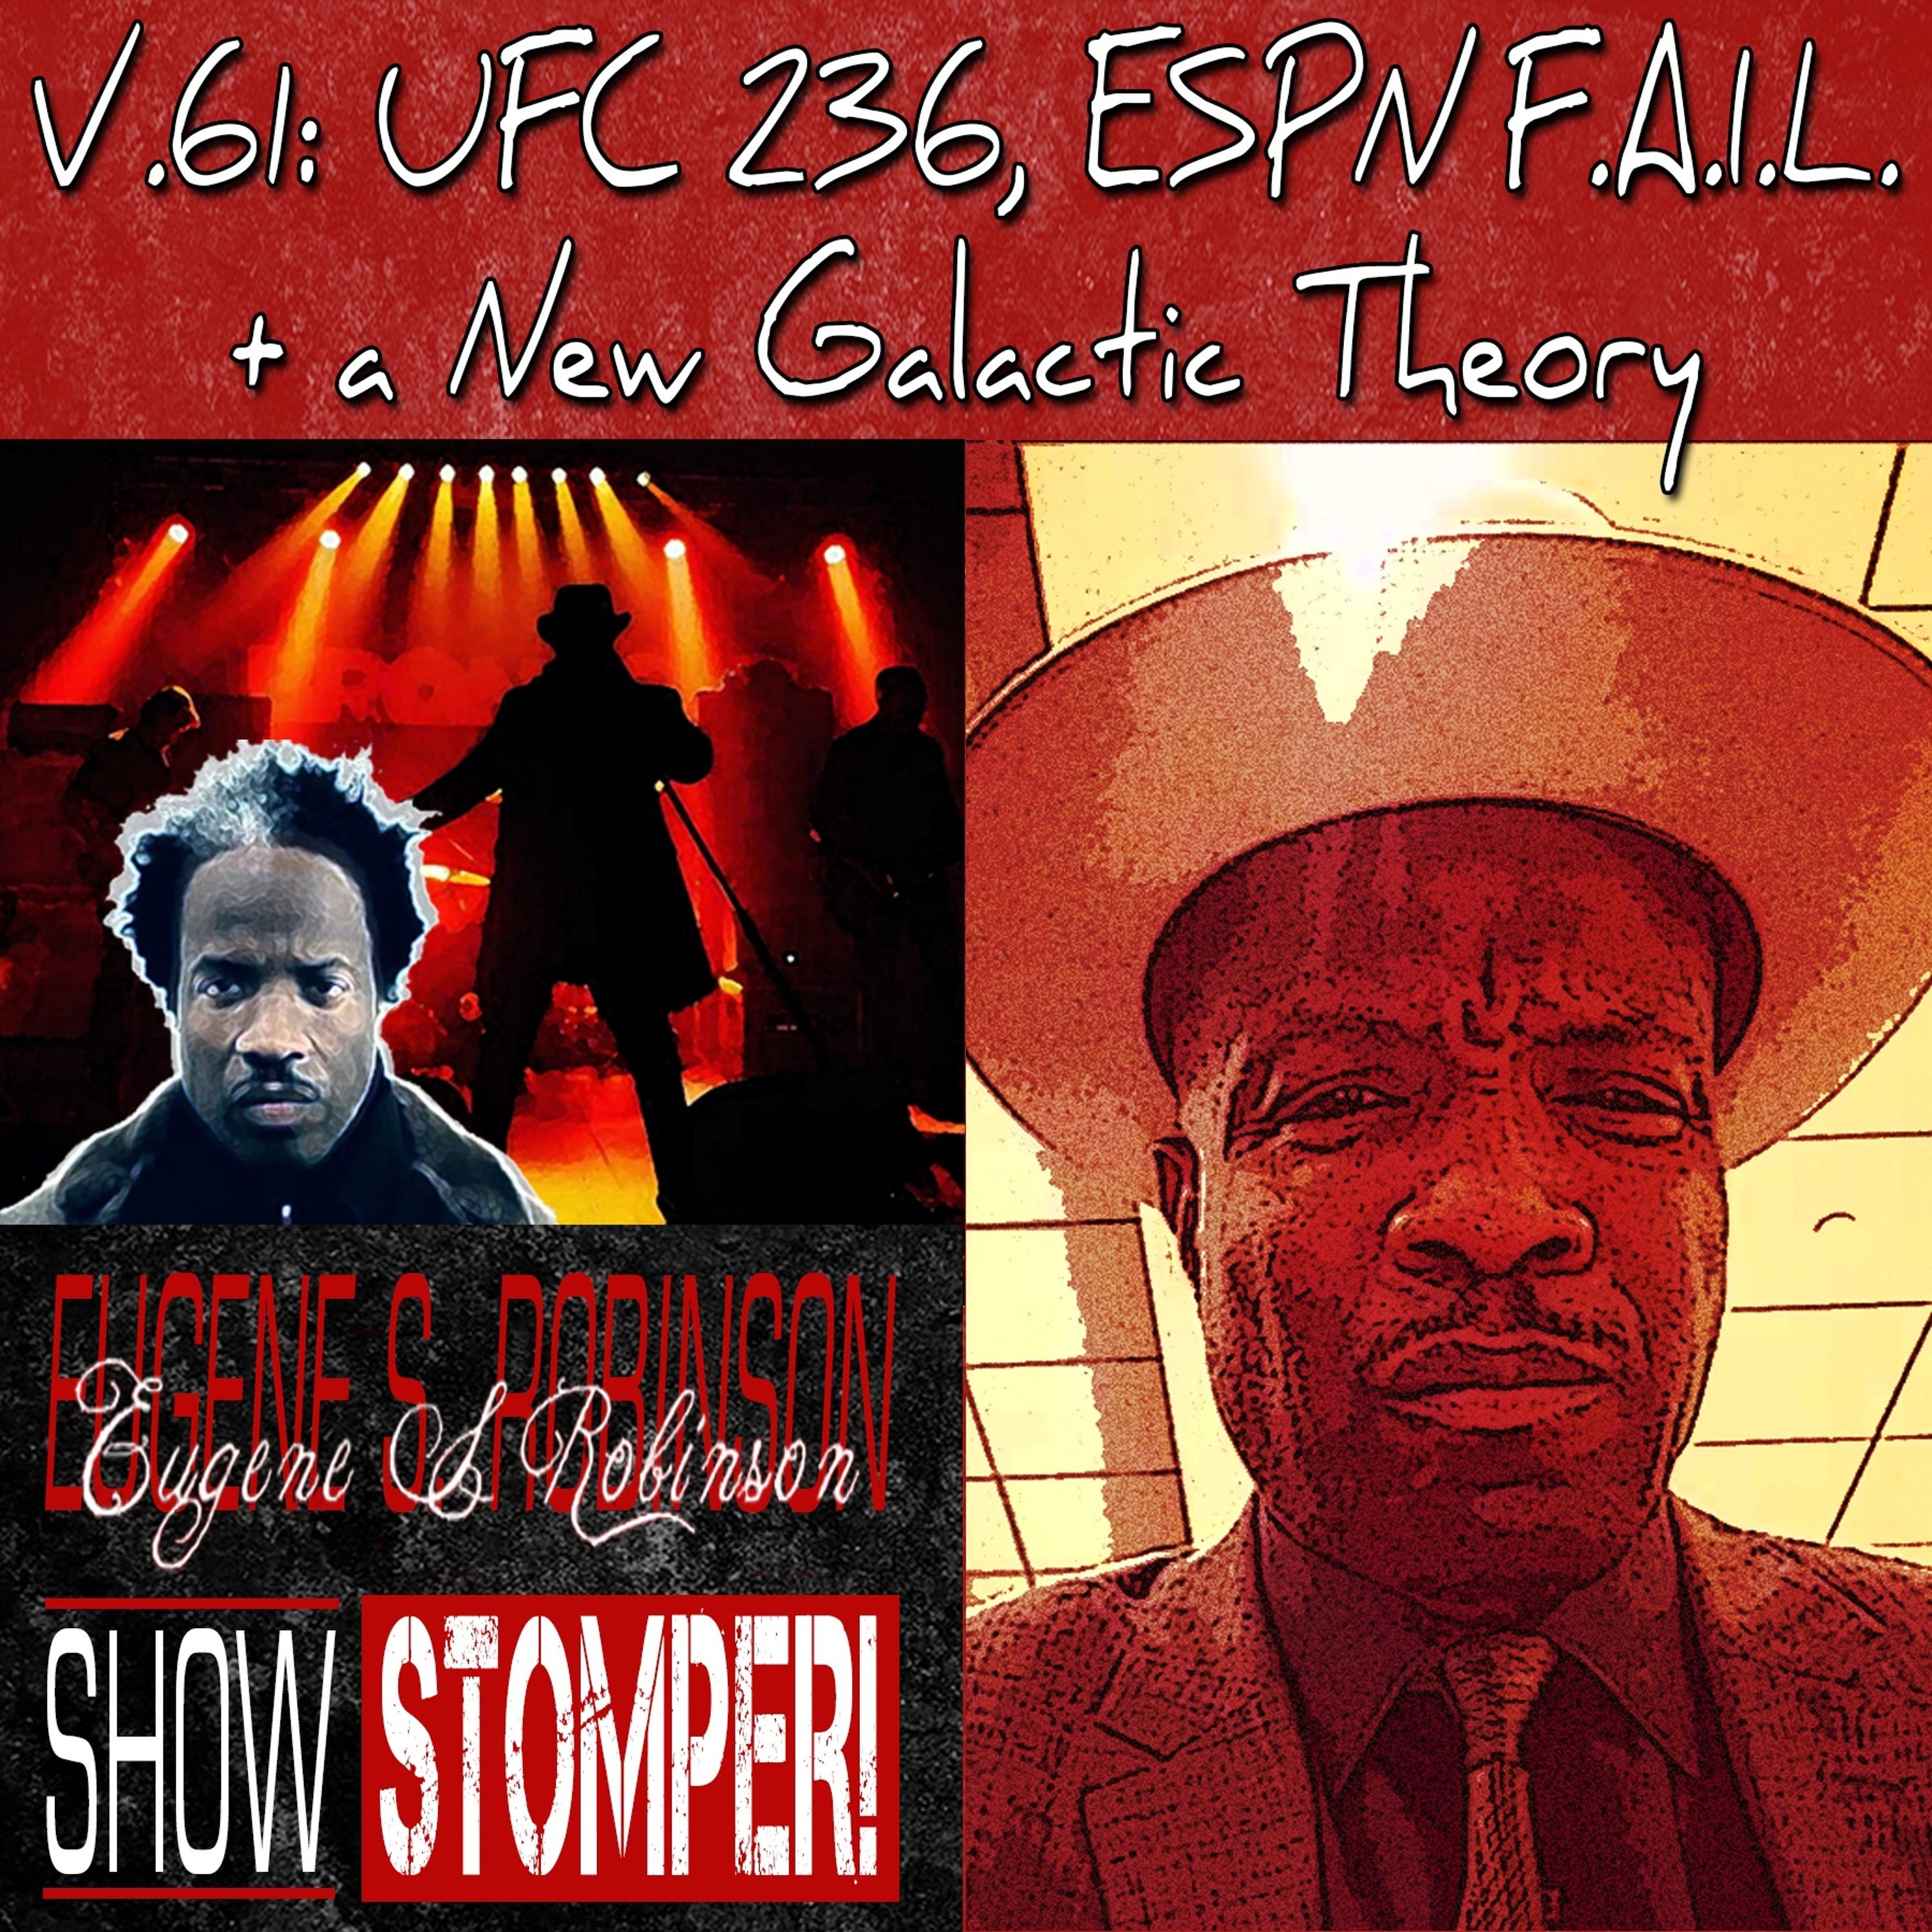 V.61 UFC 236 ESPN F.A.I.L. + A New Galactic Theory on The Eugene S. Robinson Show Stomper!